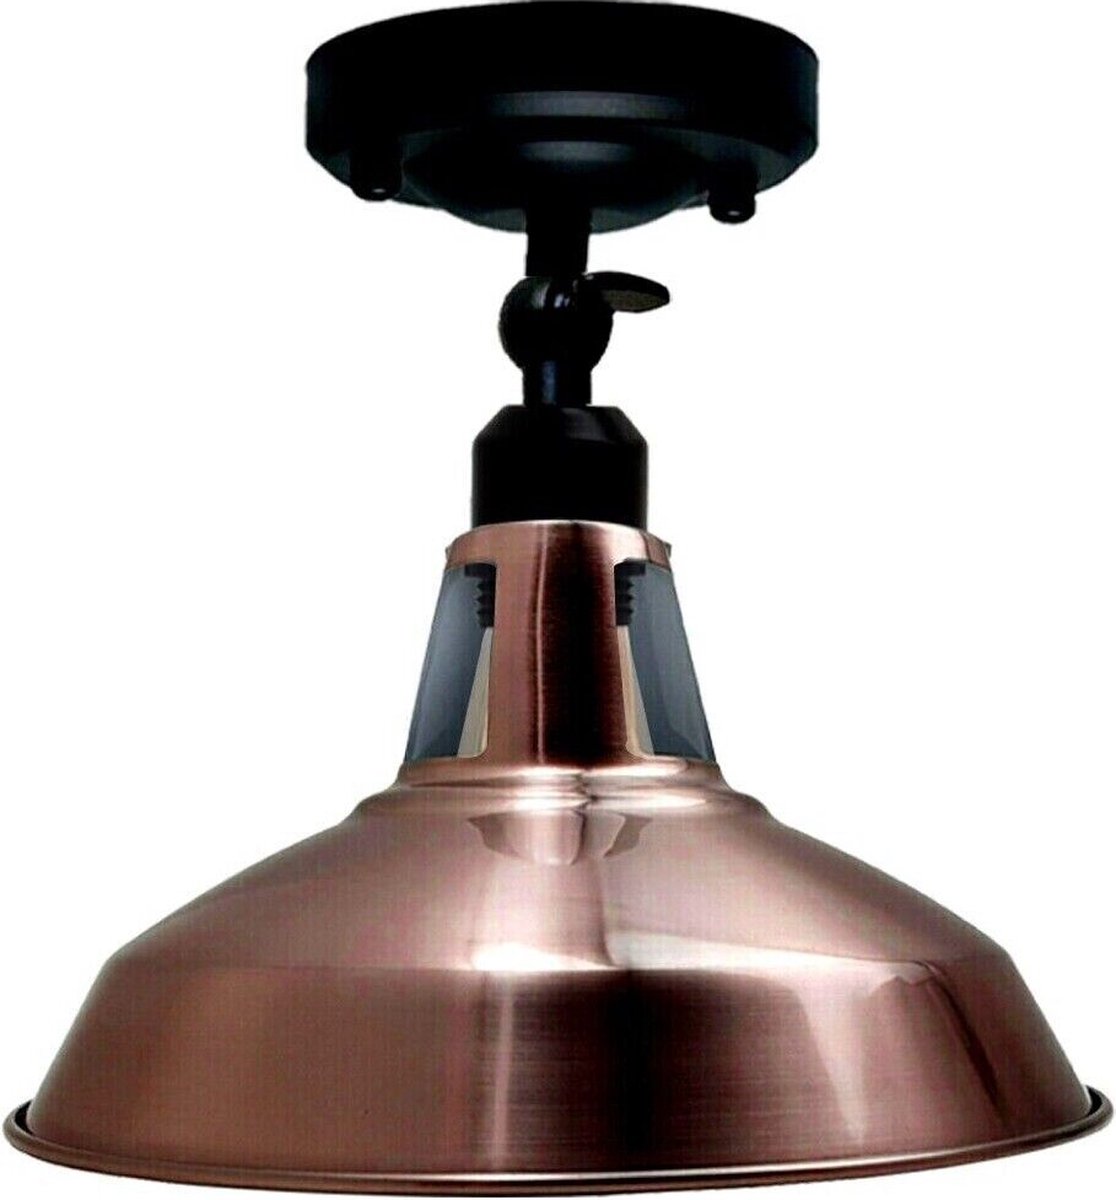 Industrial Ceiling lamp - Koper- retro - metal - Ø30cm - living room ceiling lamp - with E27 fitting - excl